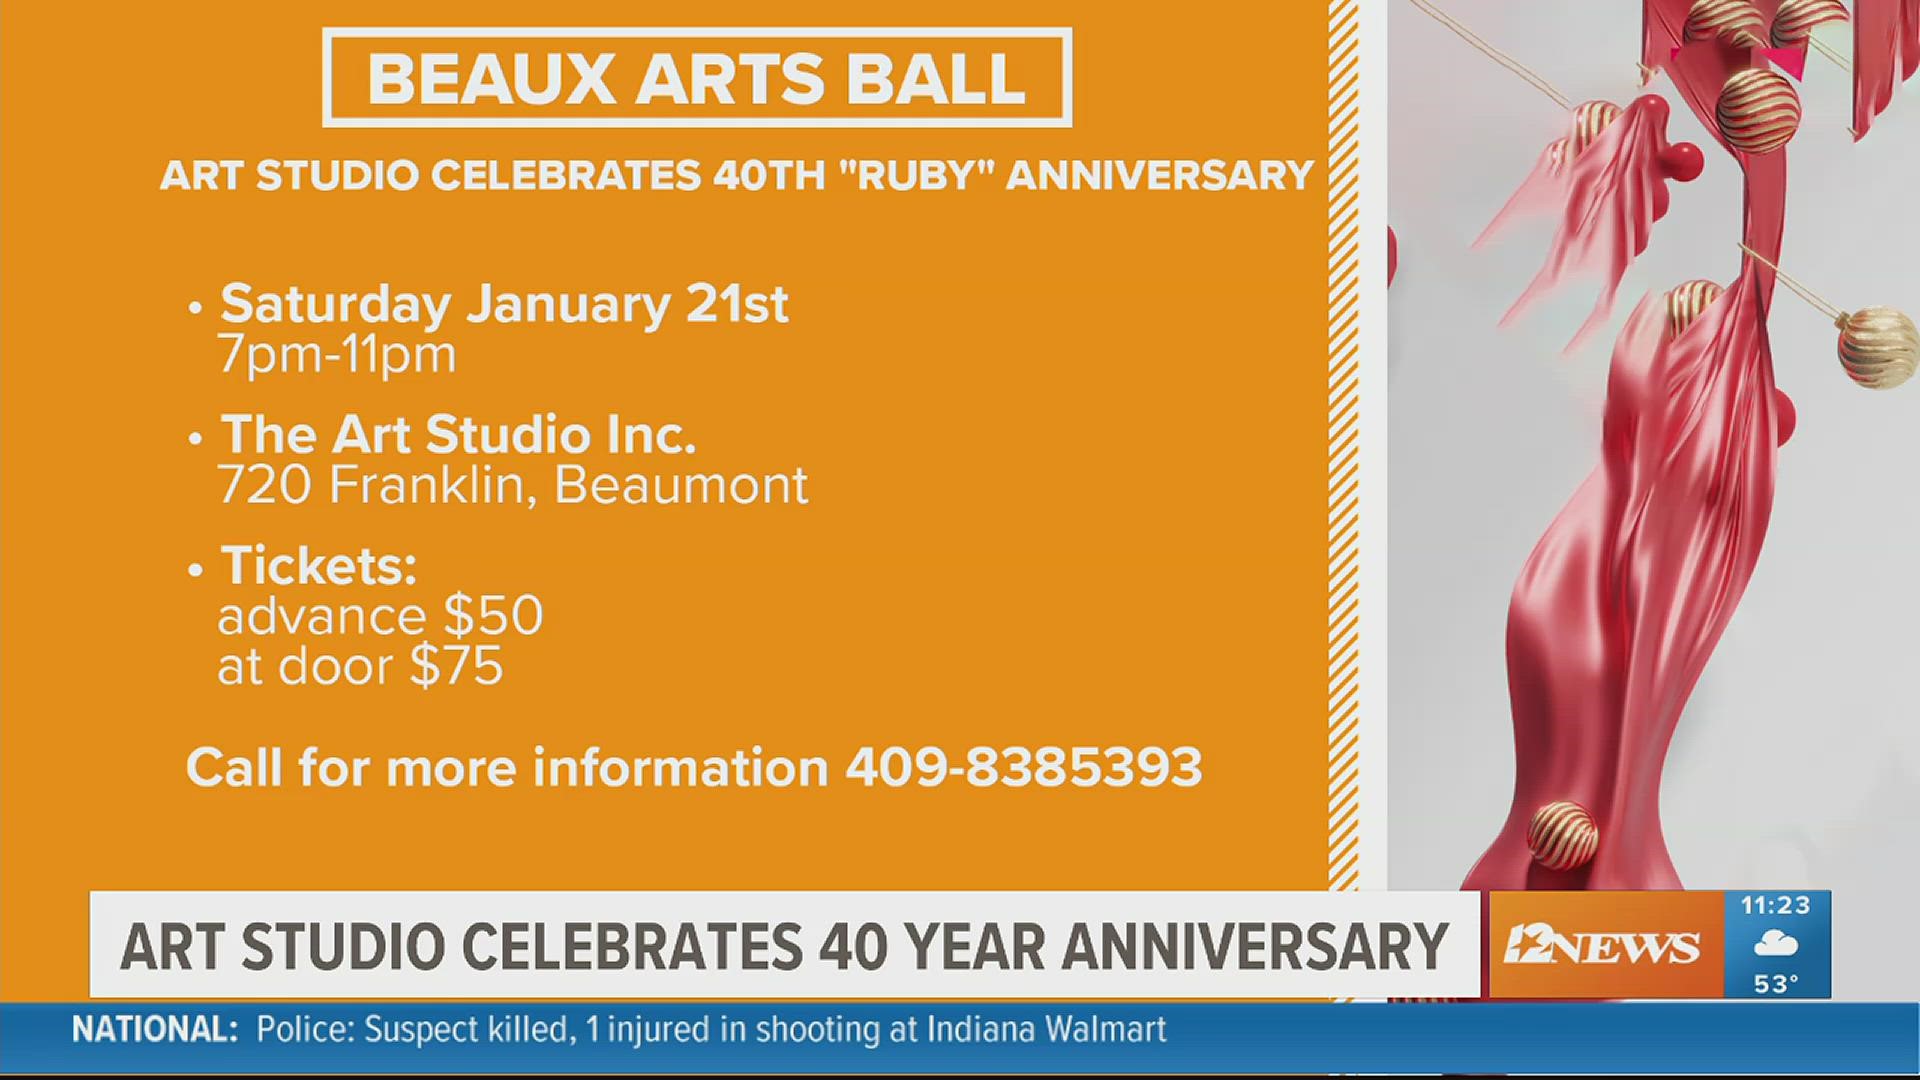 The Art Studio, Inc. is celebrating 40 years of creativity at the Beaumont artists co-op this weekend near downtown Beaumont.